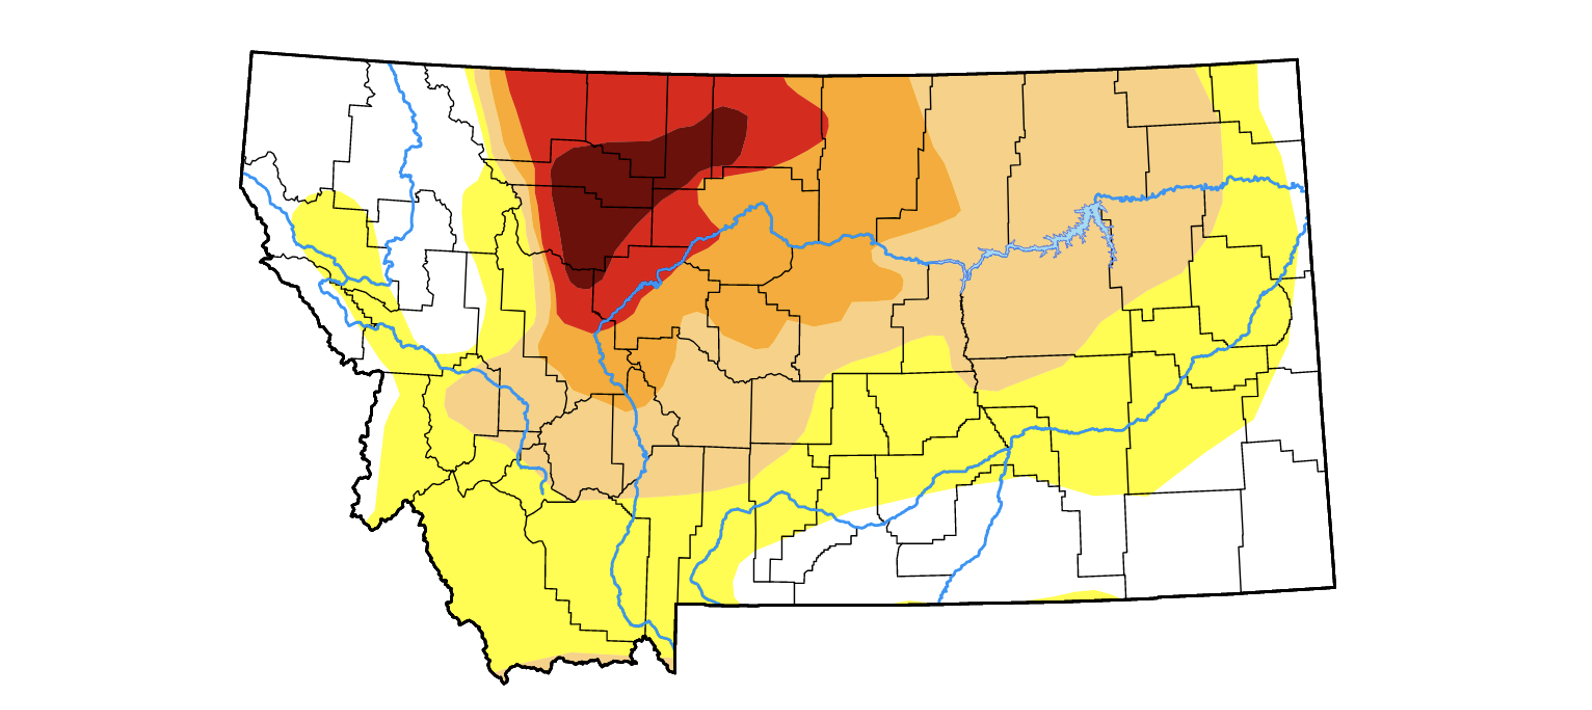 June 23 Montana Drought Map. Drought concentrated in North Central MT.